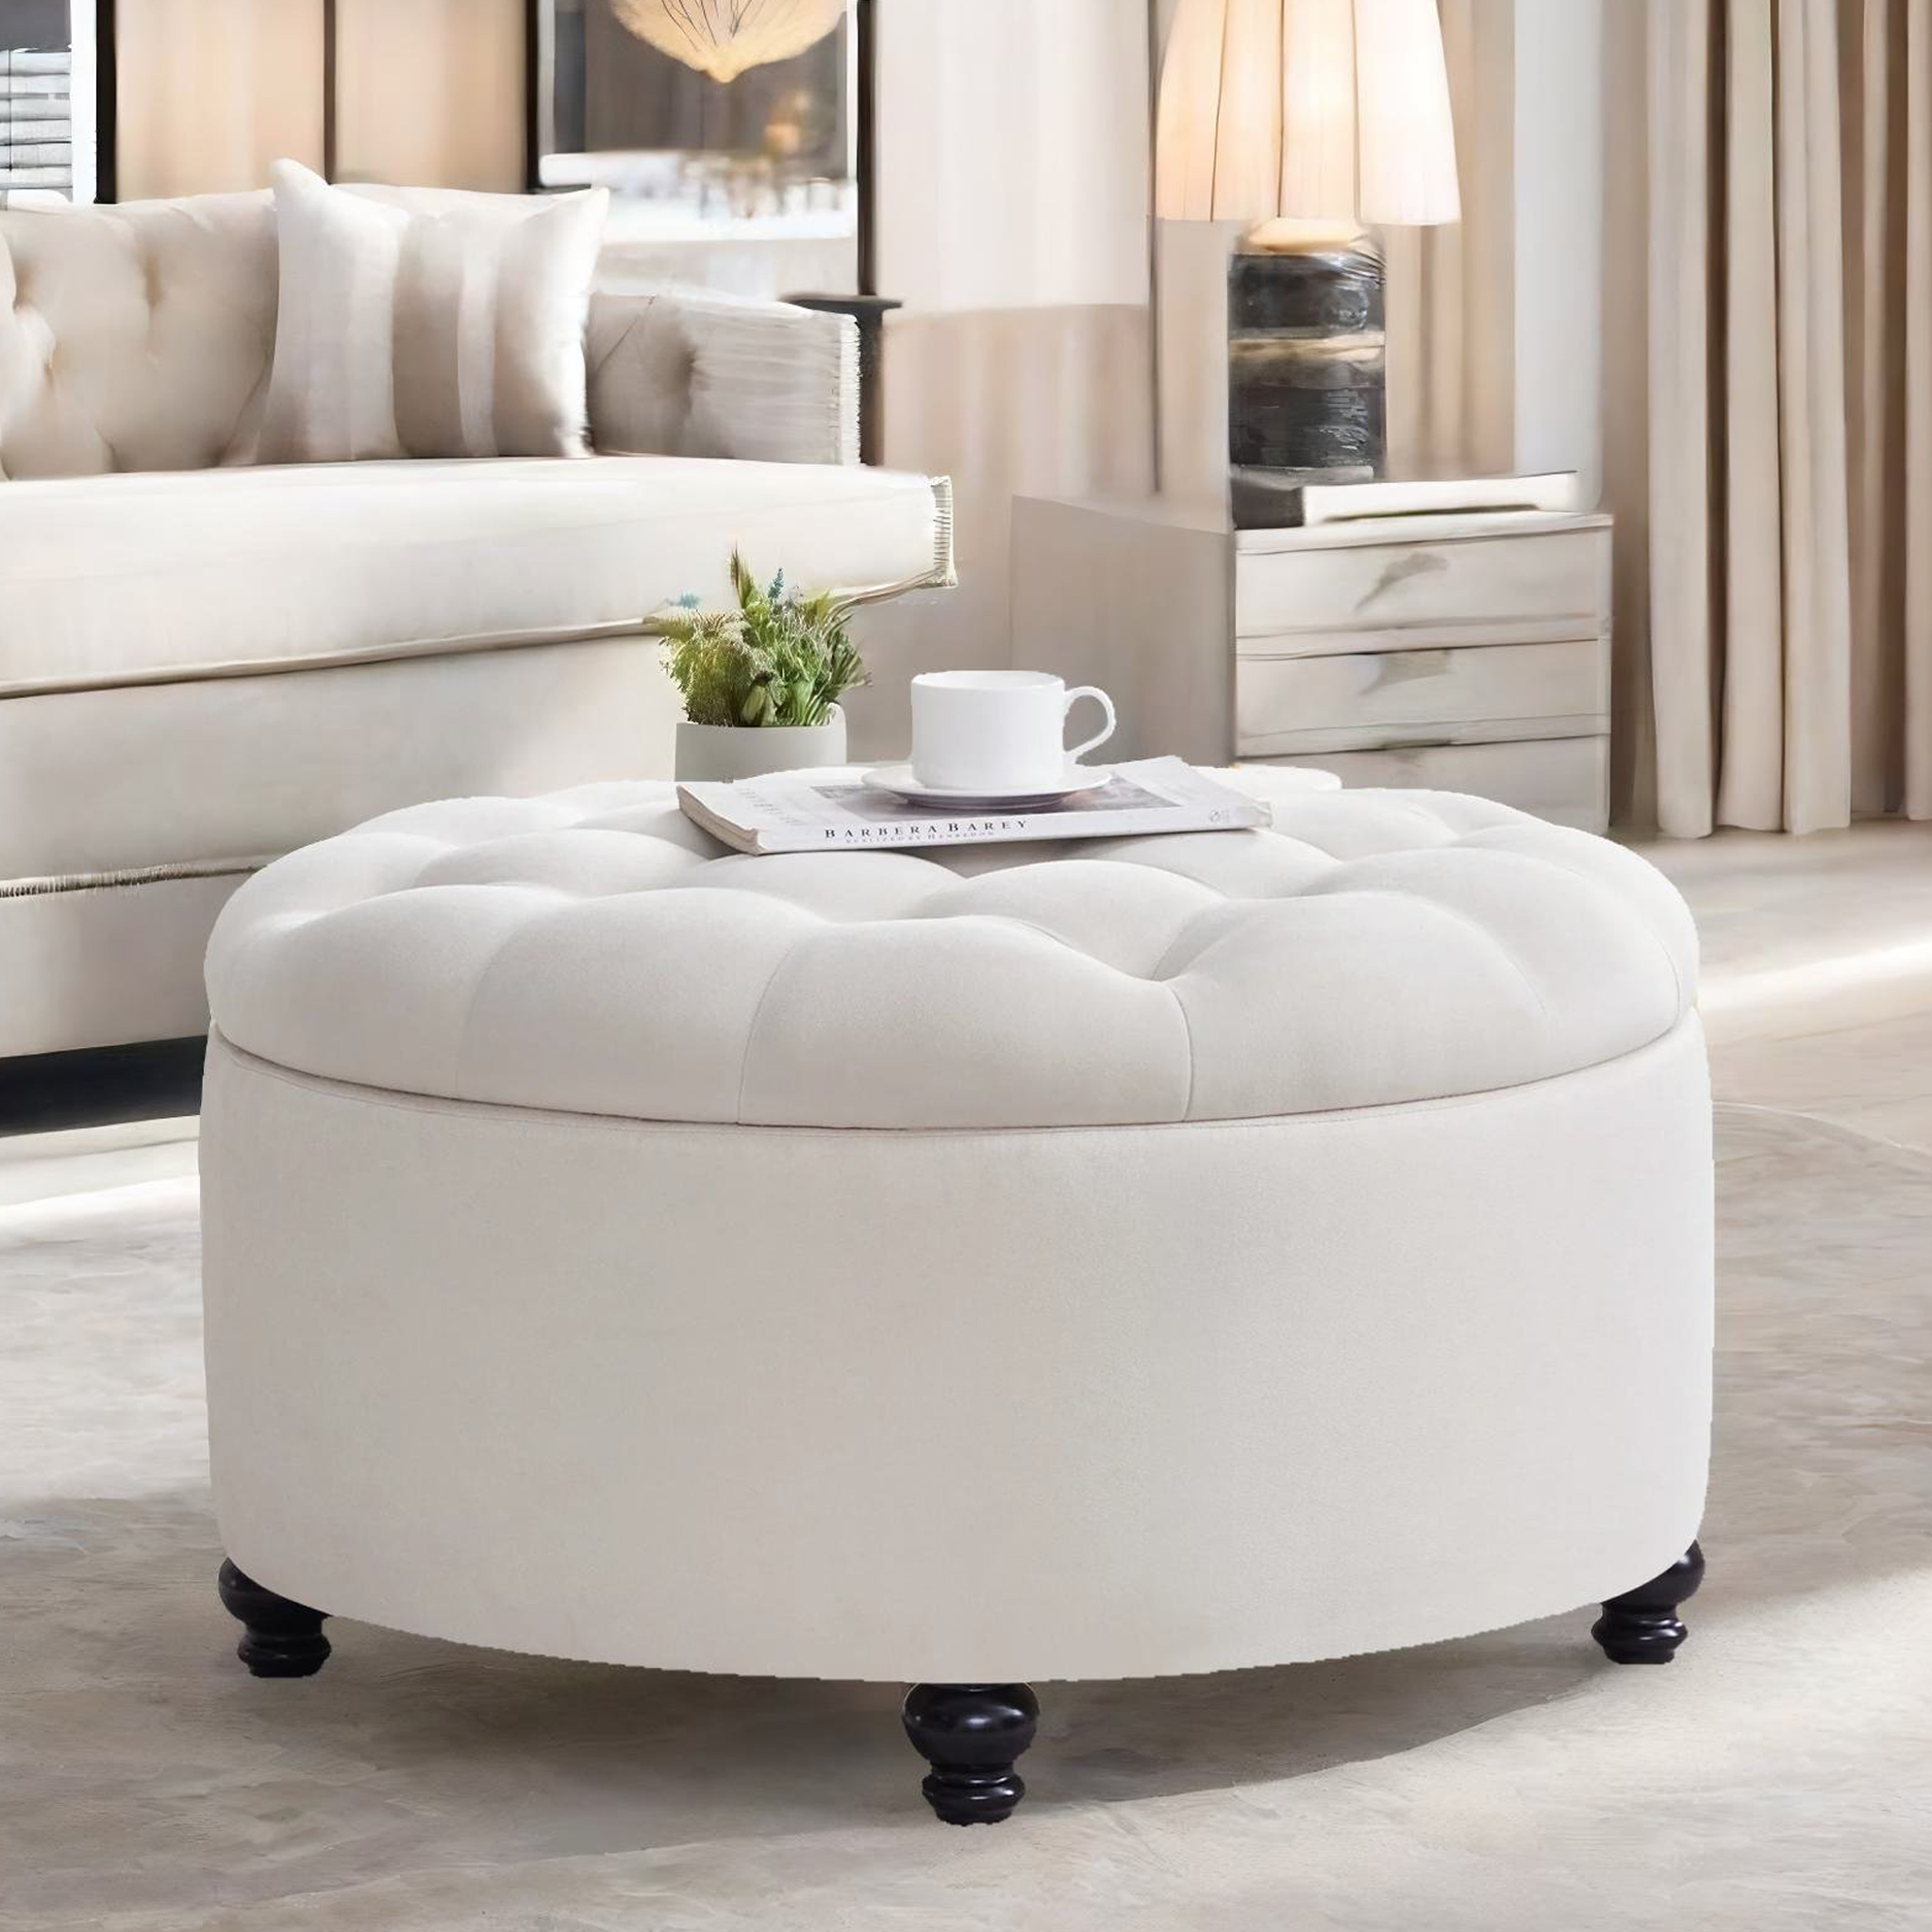 HUIMO 30" Large Round Storage Ottoman Footstool, Upholstered Button Tufted Ottoman Coffee Table, Ottoman with Storage for Living Room & Bedroom (Beige) - image 4 of 10